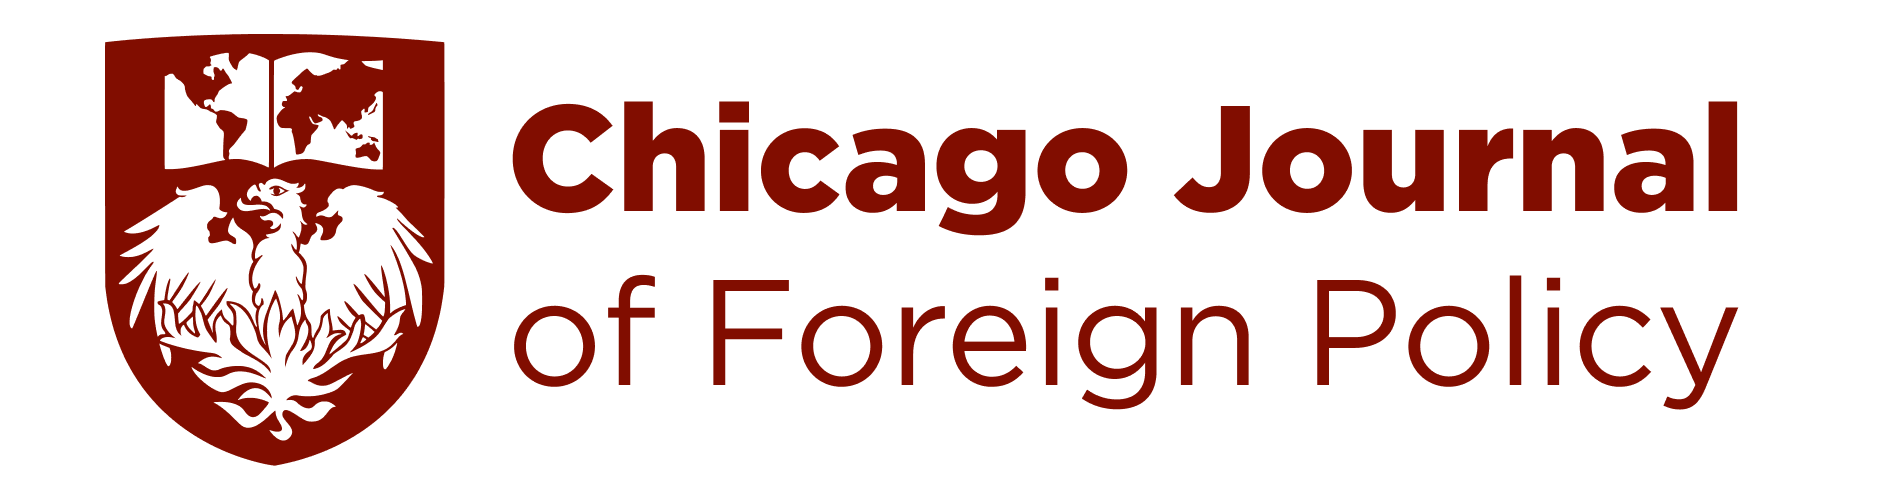 The Chicago Journal of Foreign Policy